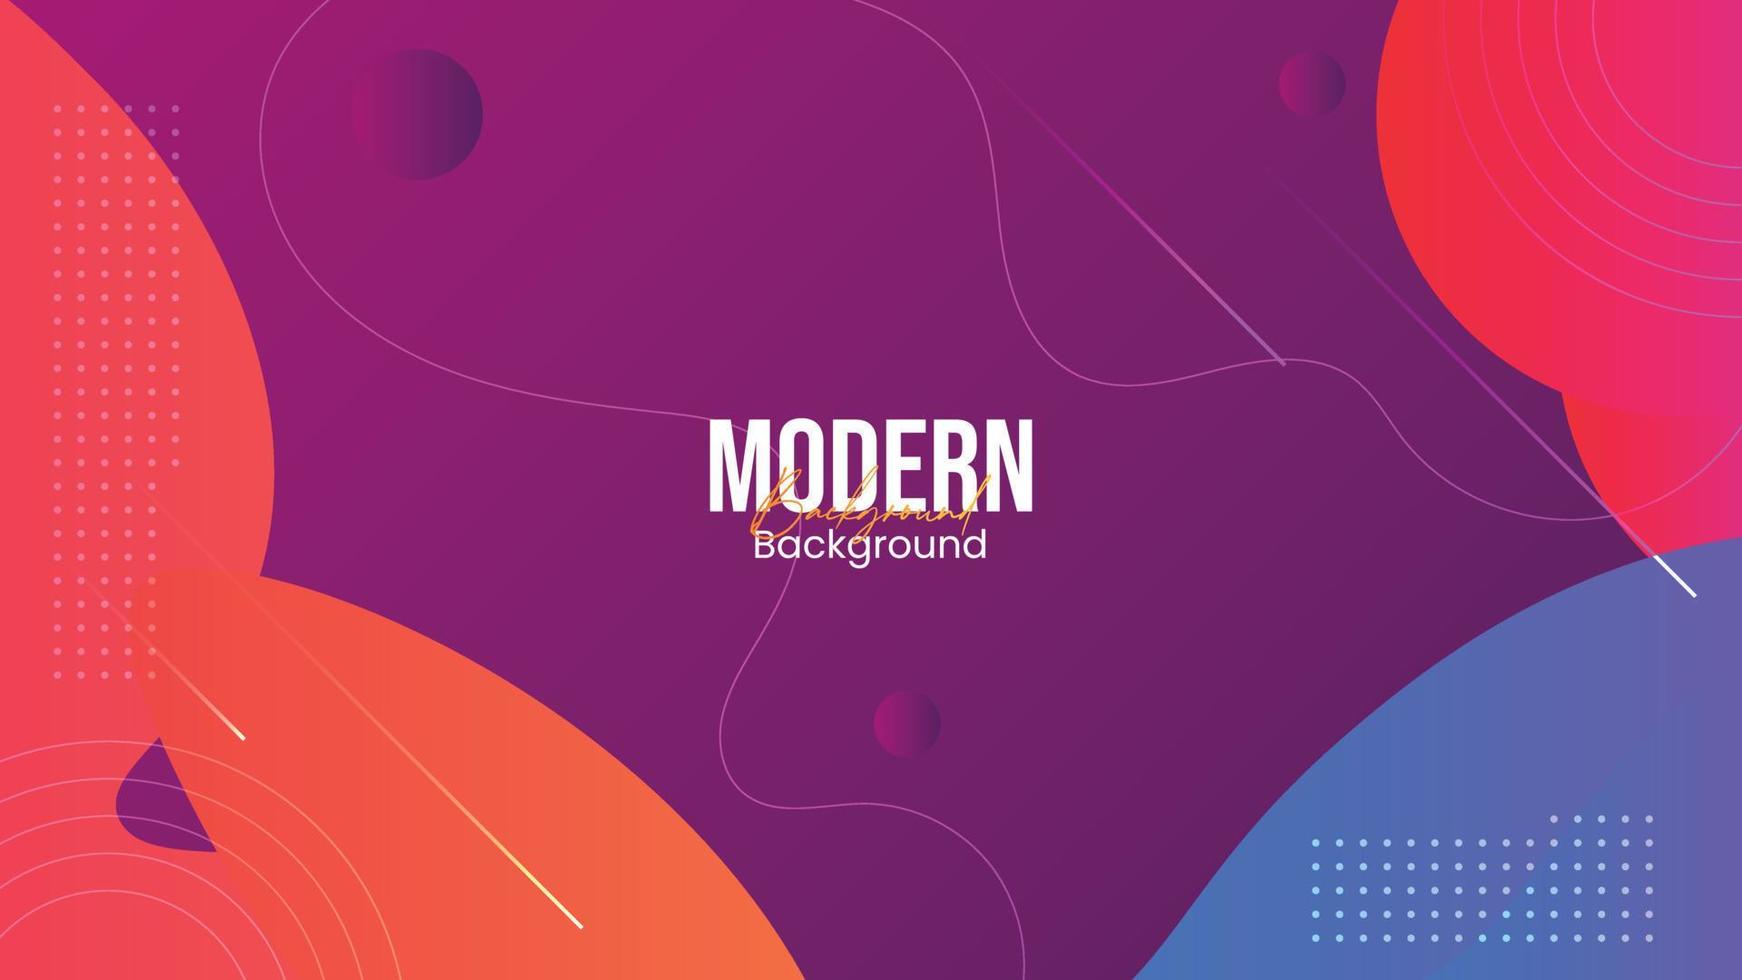 Abstract Modern background with waves vector